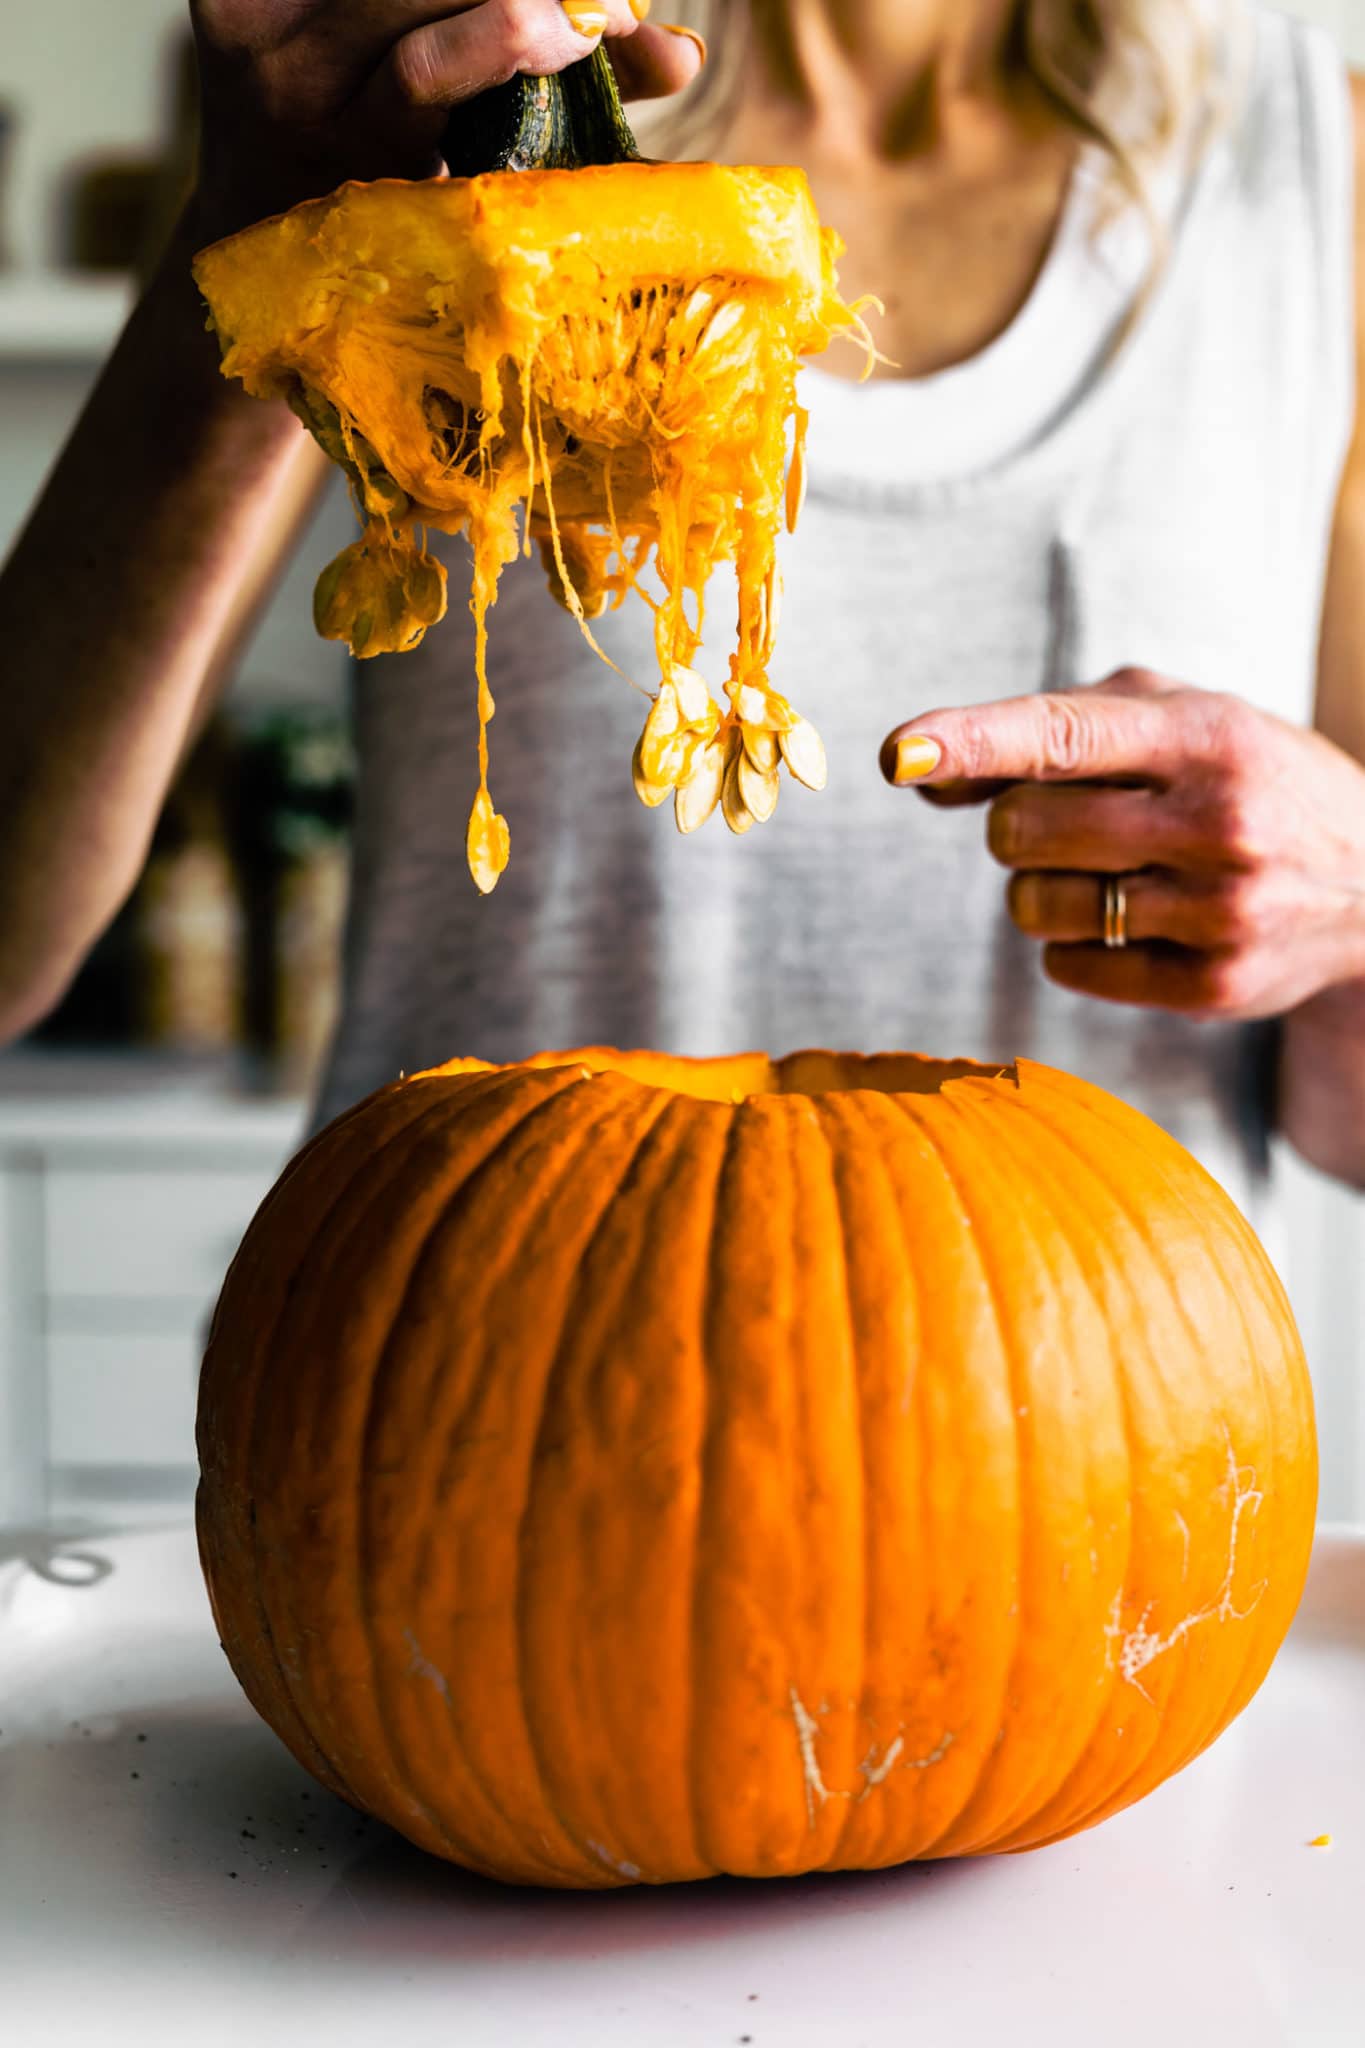 Woman holding the top of a pumpkin with seeds dangling down pointing to the seeds